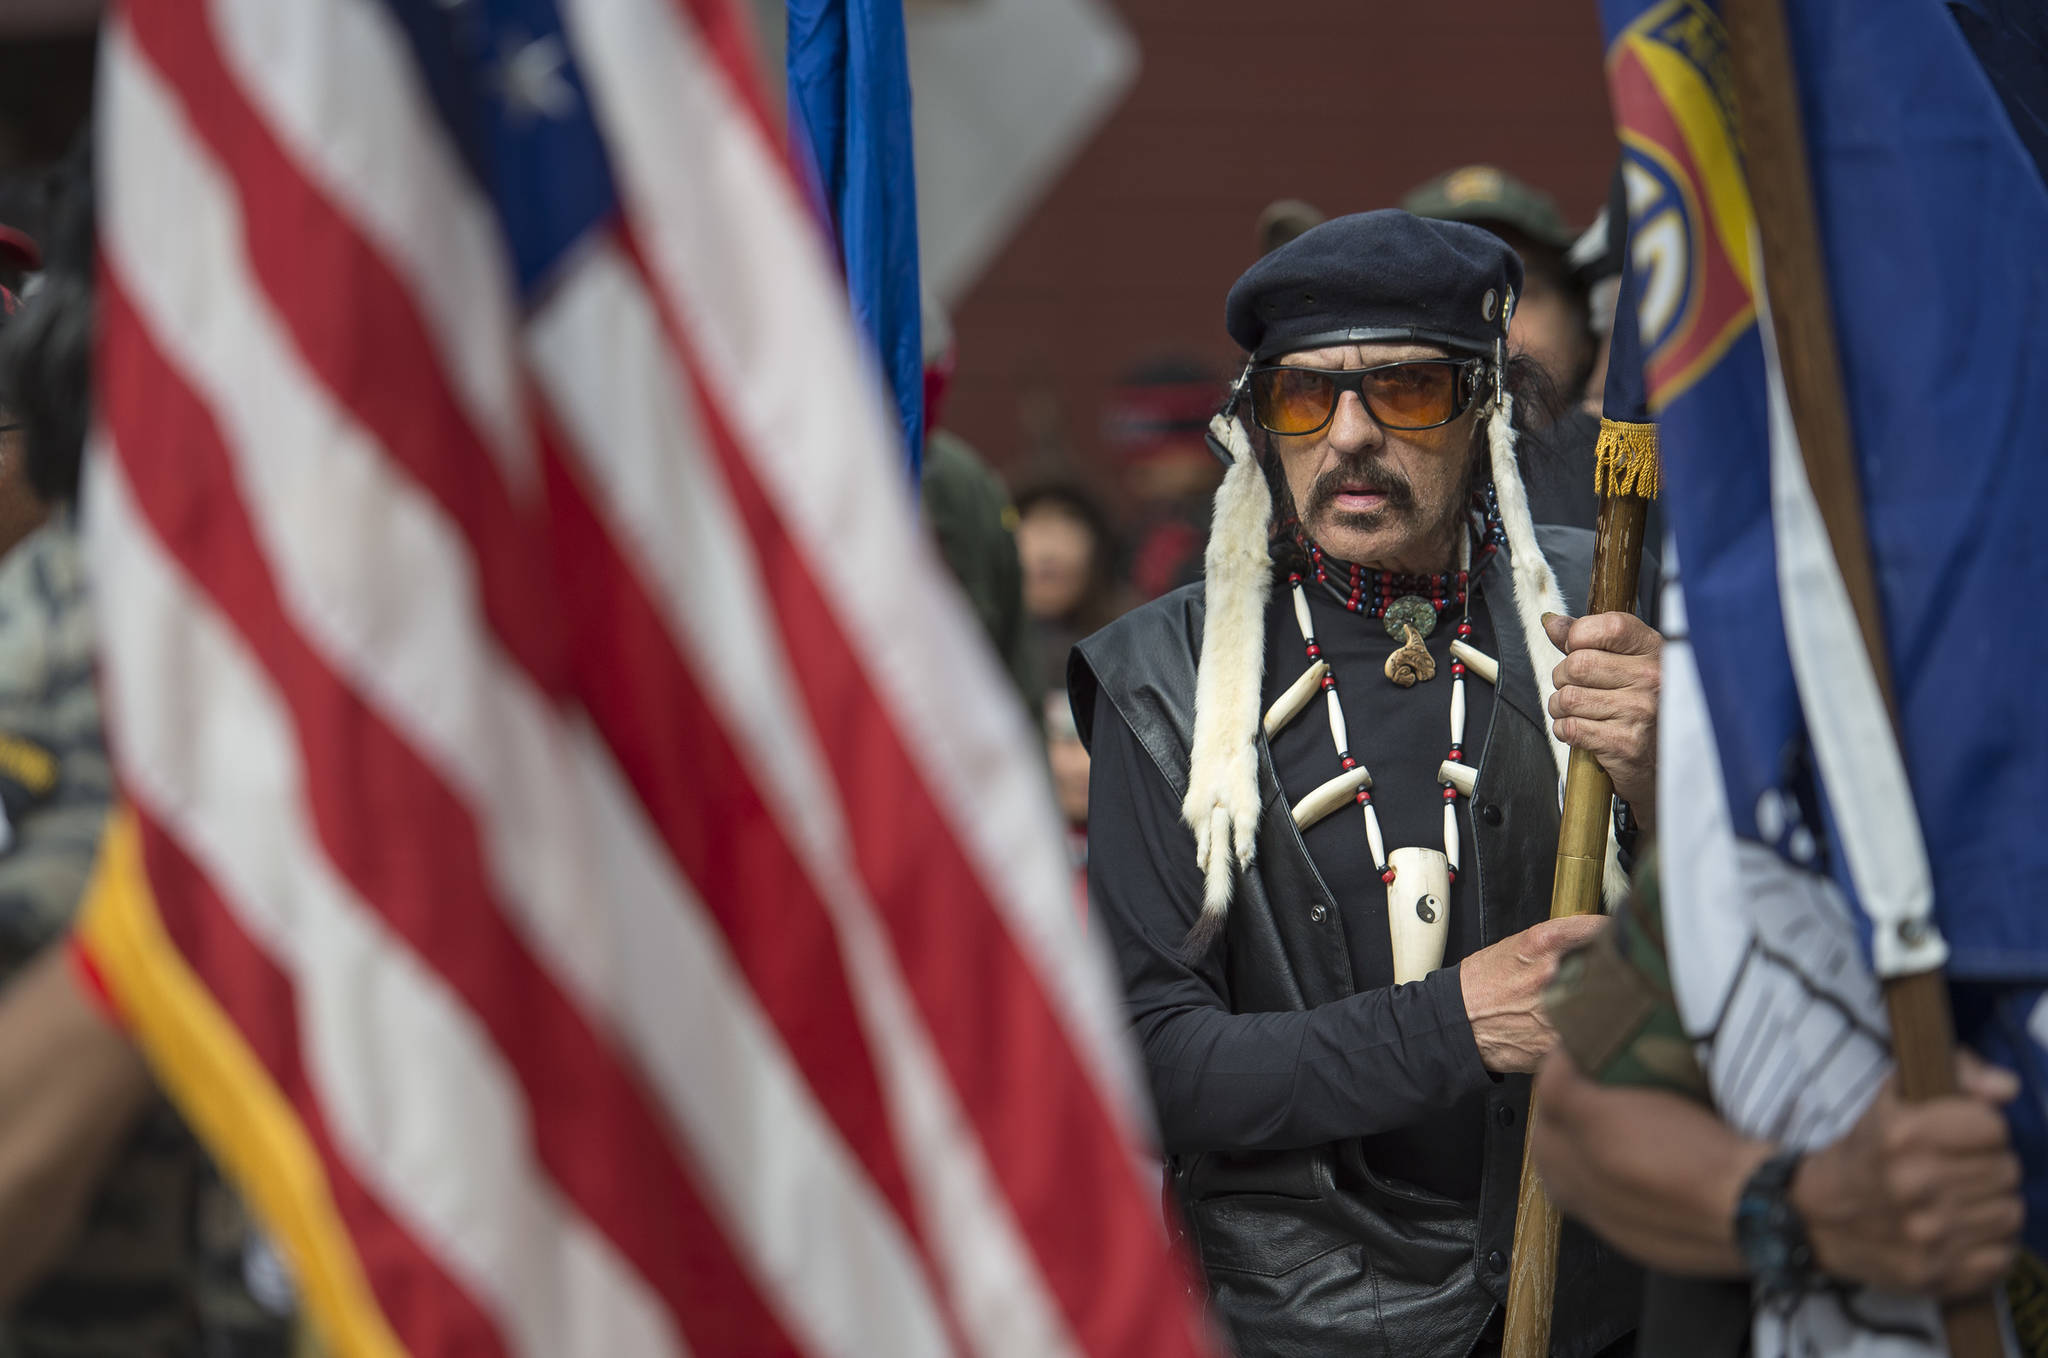 Wayne Smallwood lines up with the Southeast Alaska Native Veterans honor guard to lead dance groups parade through downtown Juneau on Saturday, June 9, 2018. (Michael Penn | Juneau Empire)